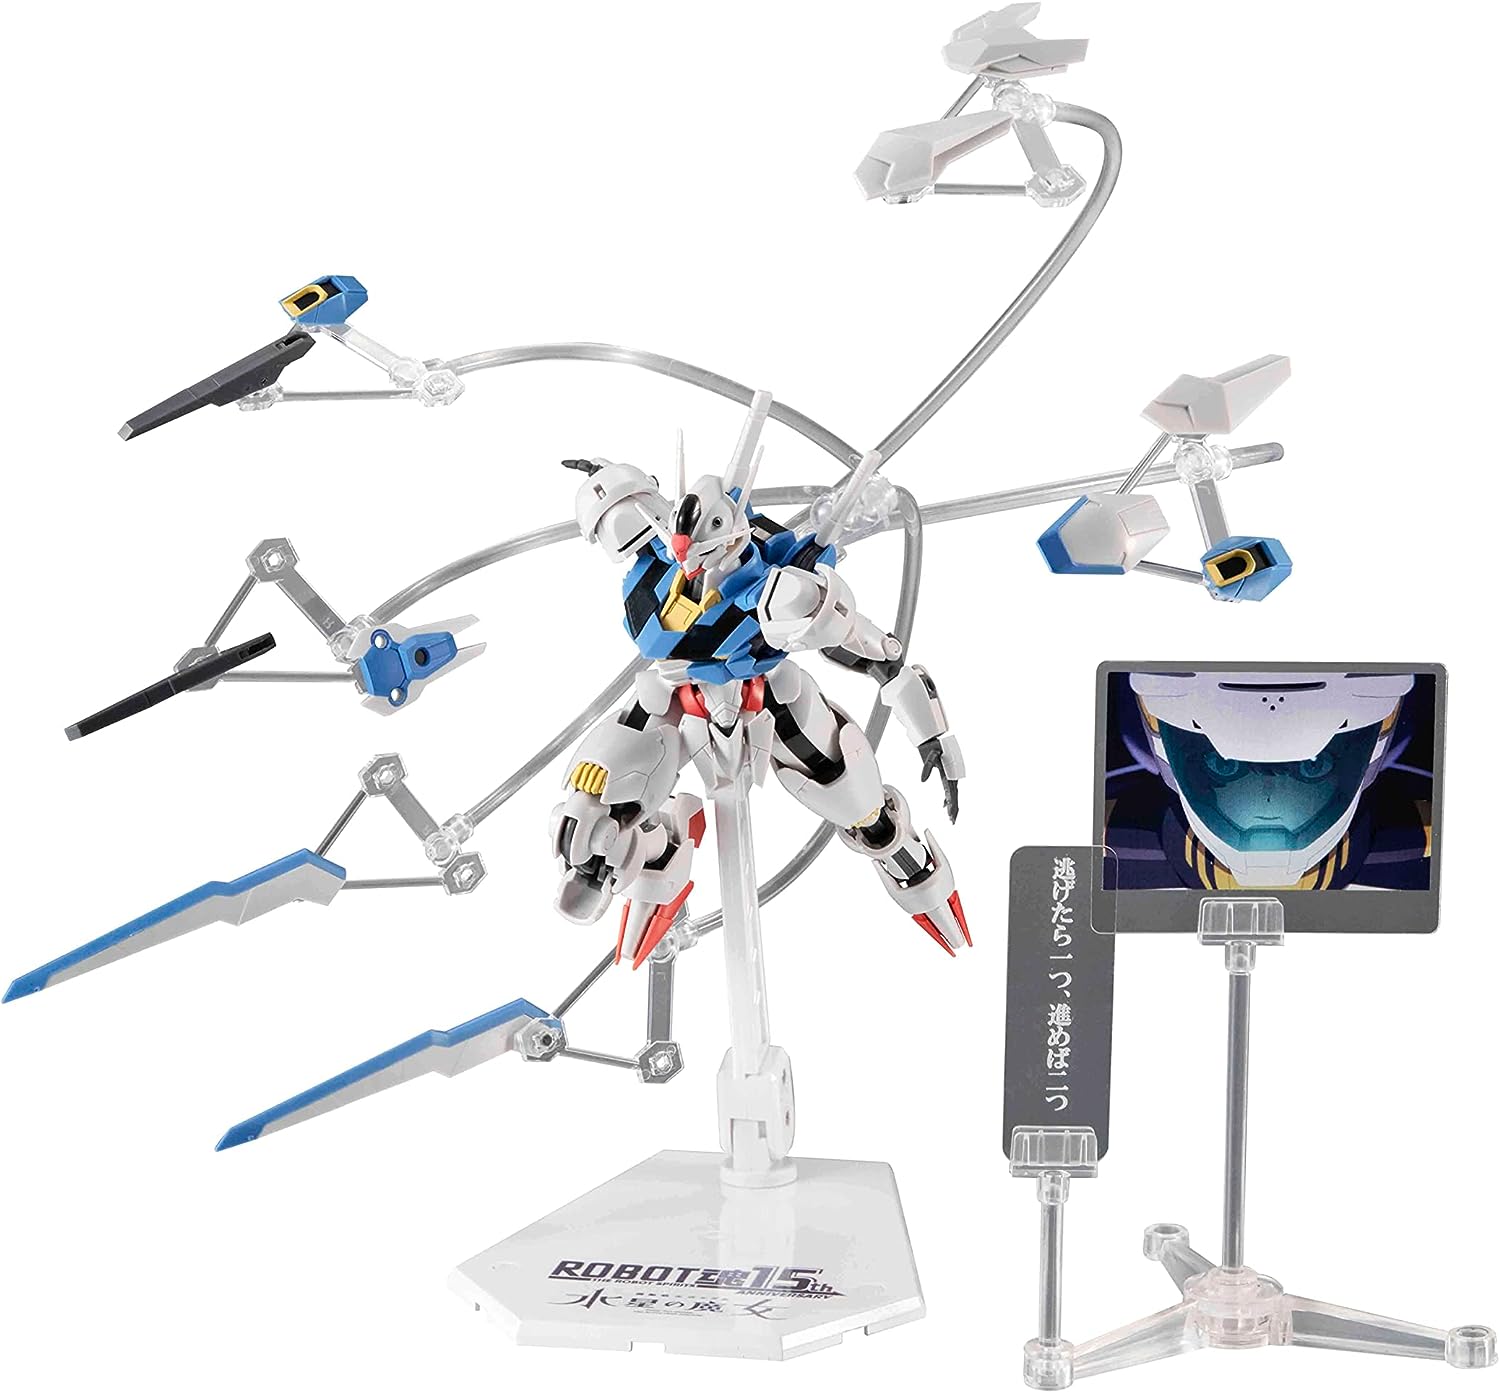 Bandai Robot Tamashii <SIDE MS> Mobile Suit Gundam: The Witch from Mercury XVX-016 Gundam Aerial Ver. A.N.I.M.E. - BanzaiHobby